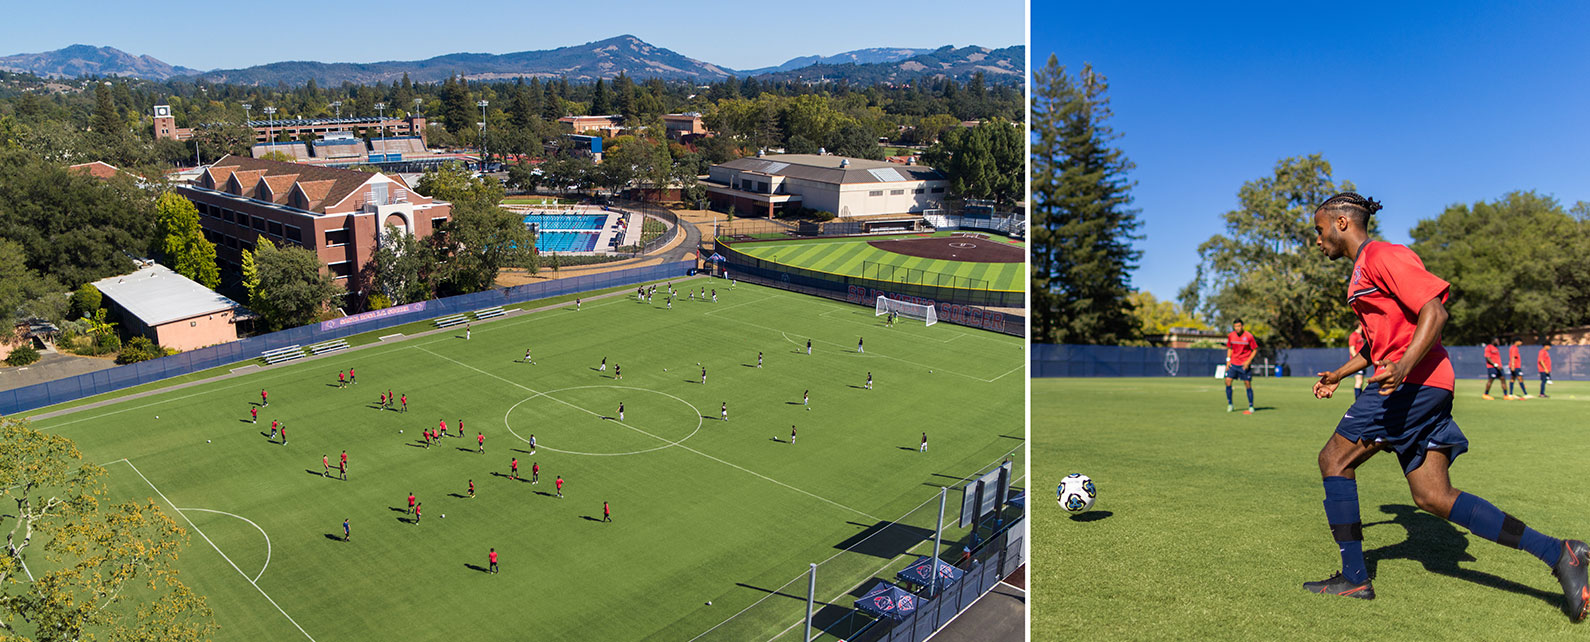 SRJC Soccer field aerial image with inset of soccer player kicking ball